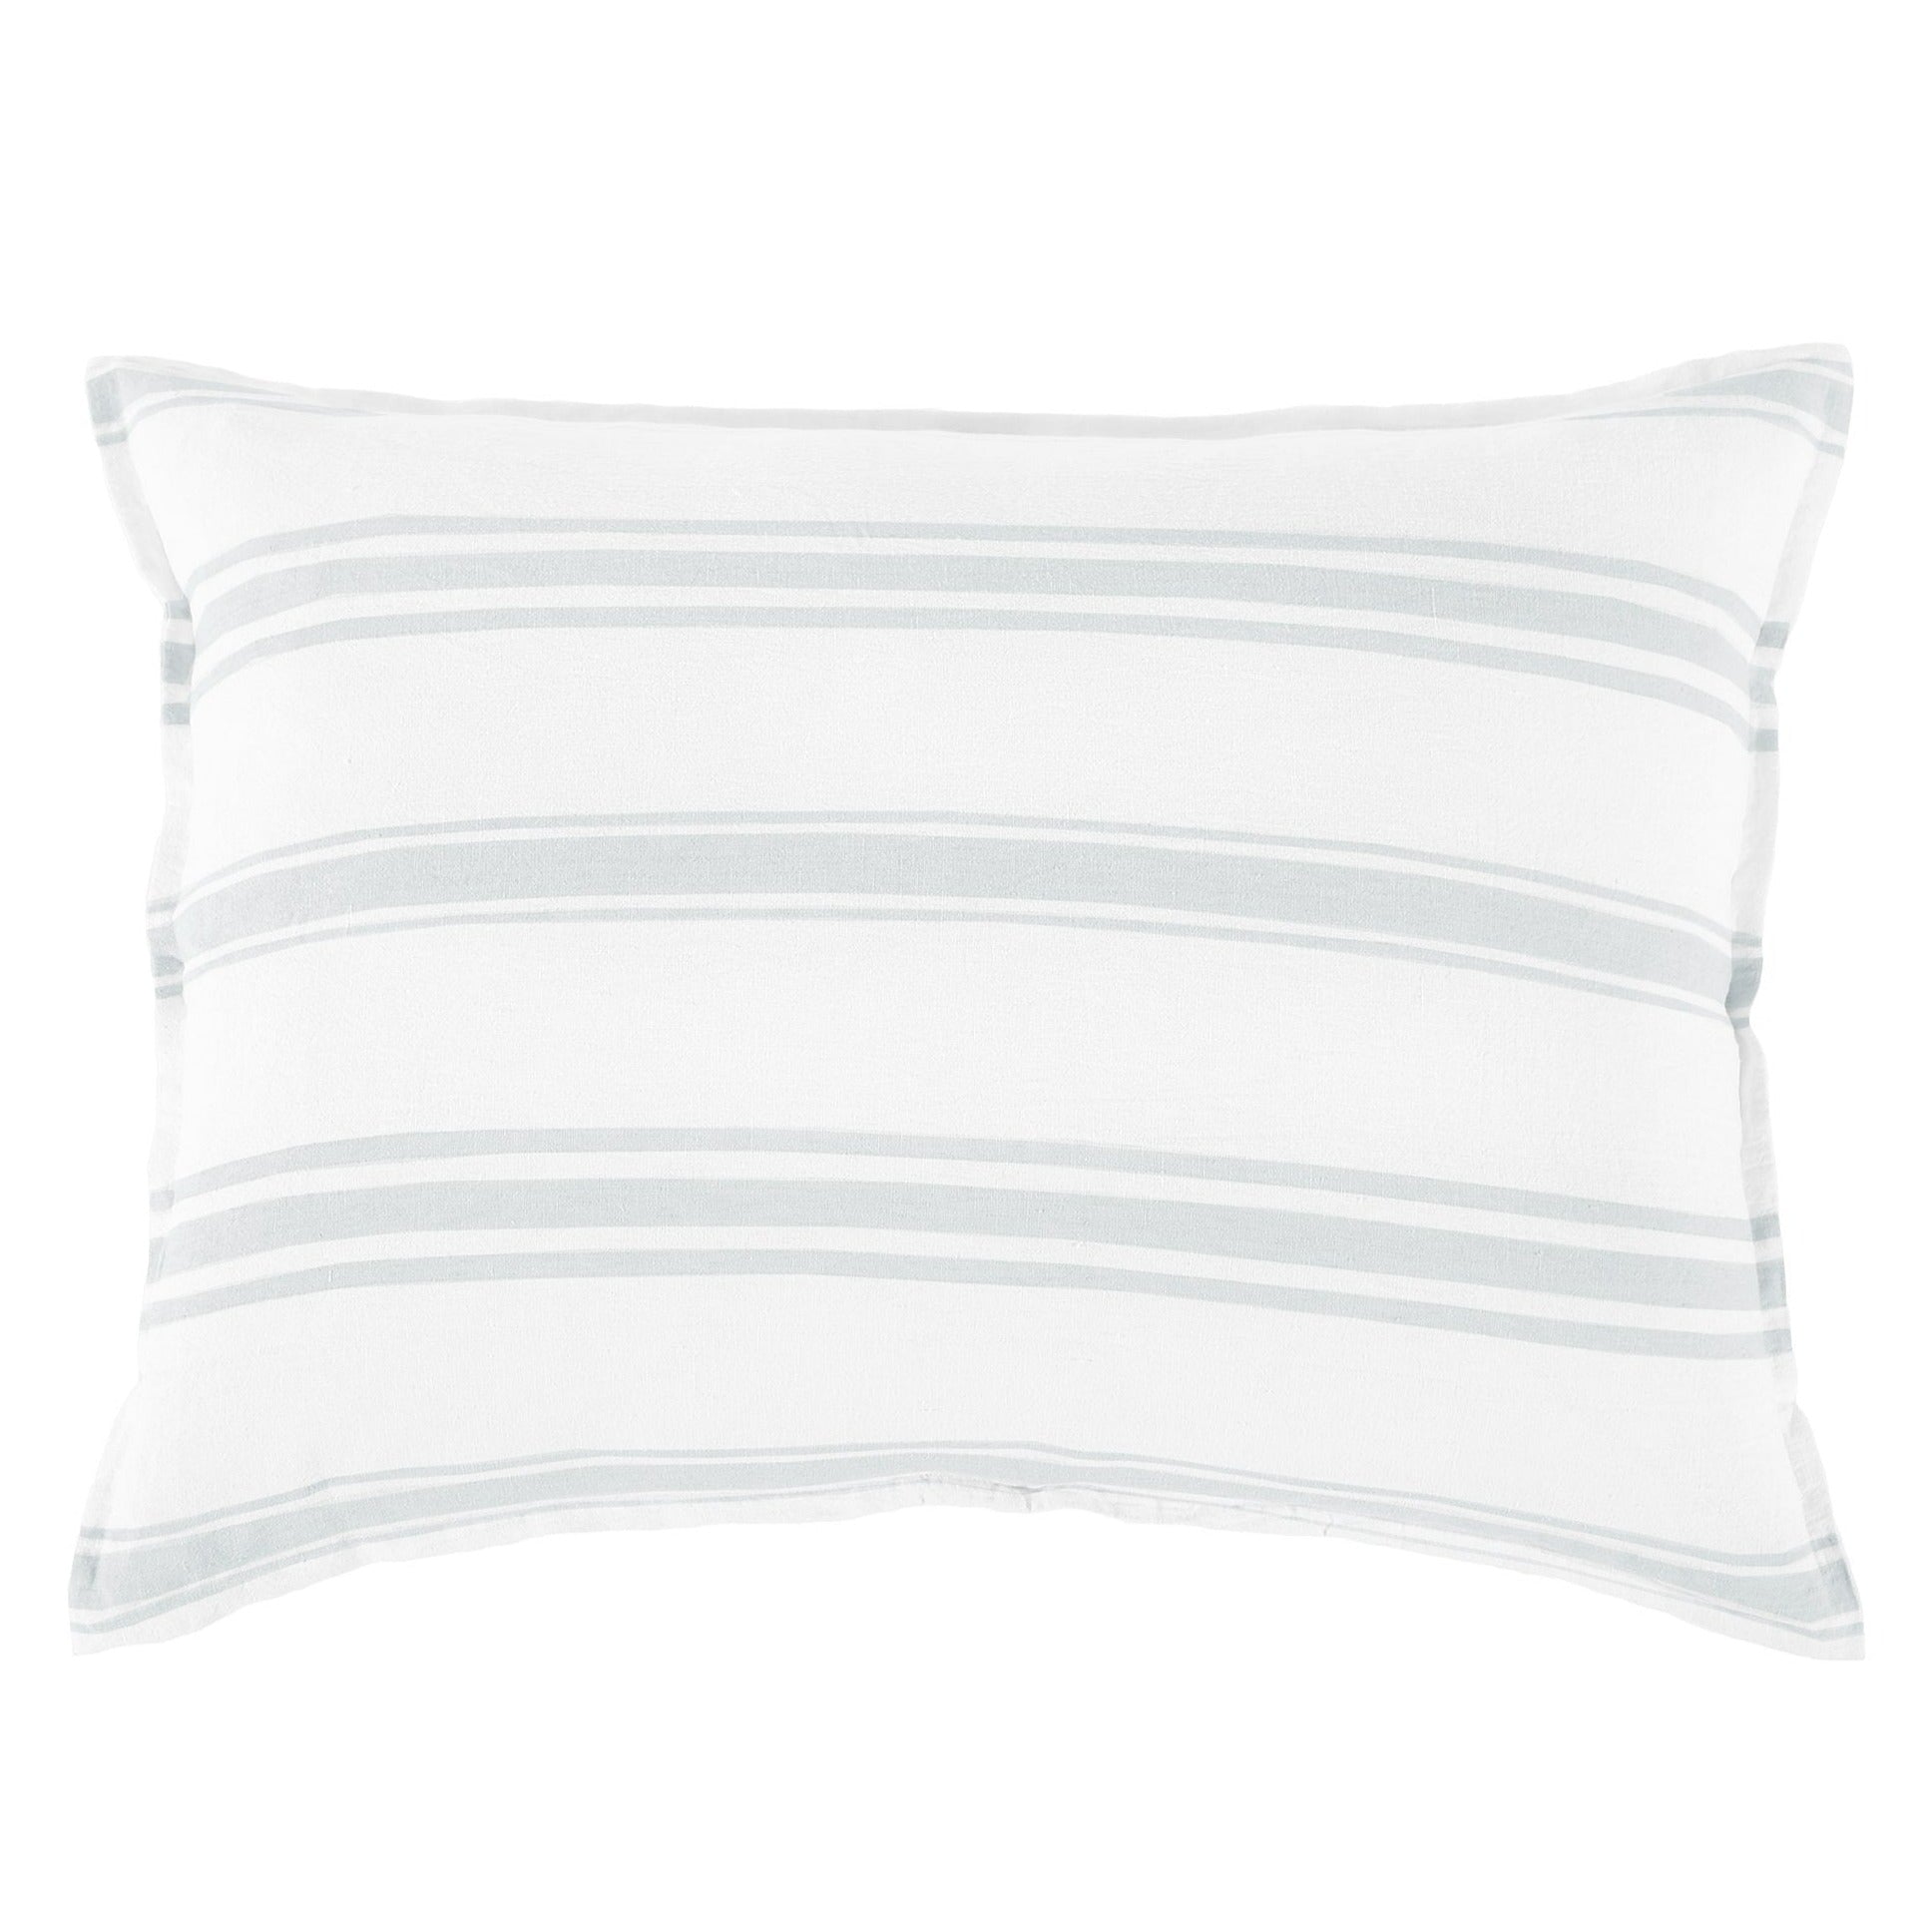 Jackson White/Ocean Big Pillow by Pom at Home